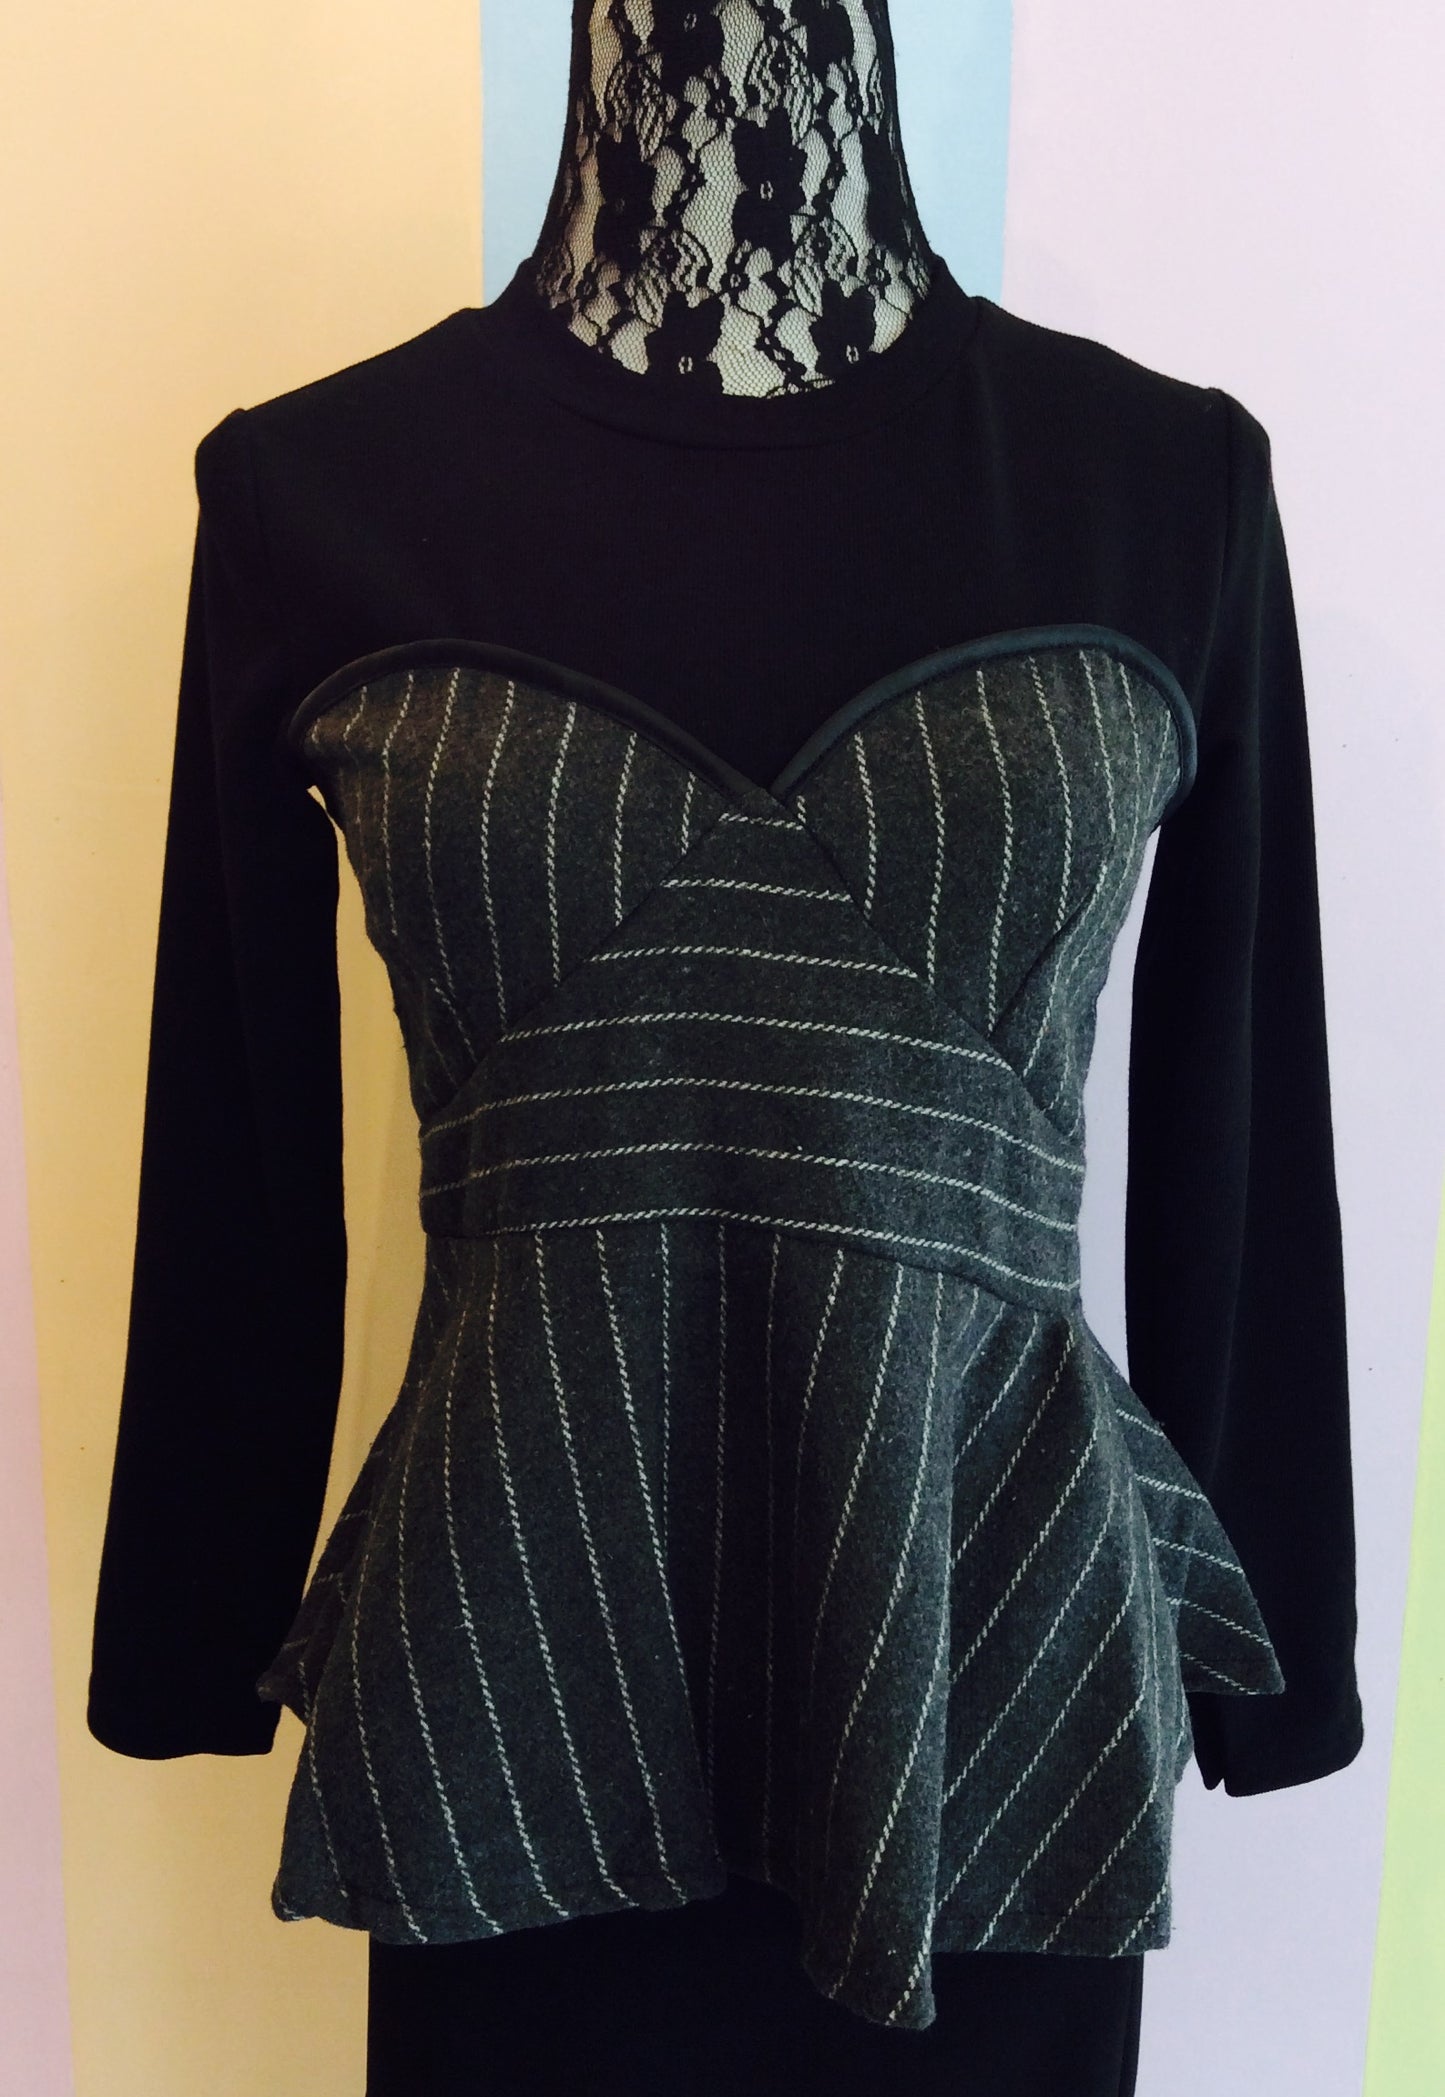 Full Sleeve Top w/ Attached Stripe Corset...